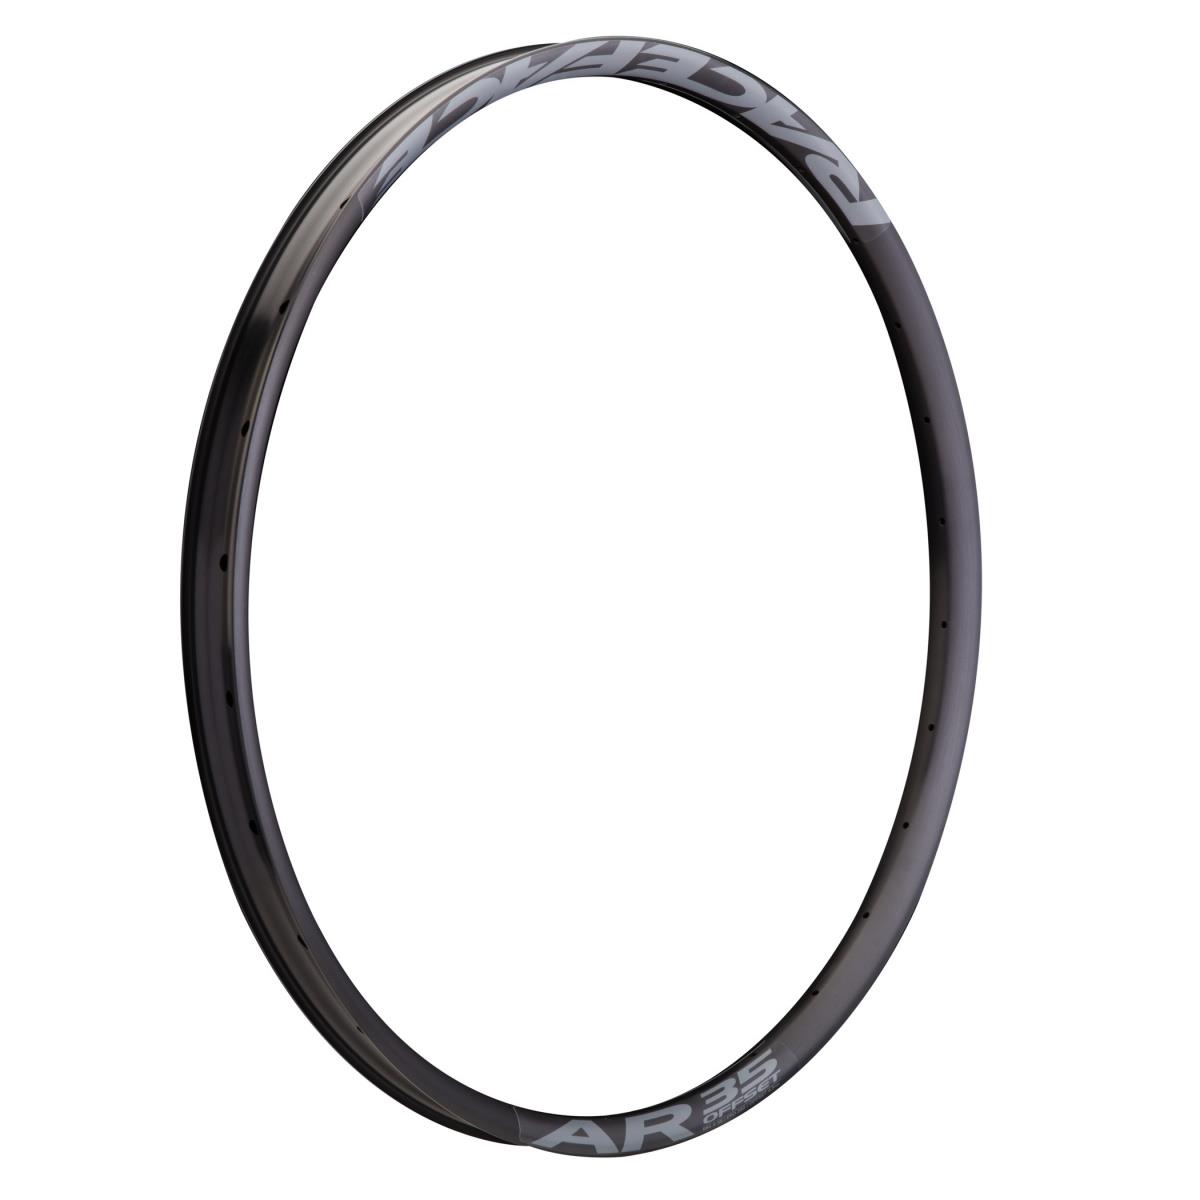 Race Face Jante MTB Ar Offset 35 Black/Grey, 29 Inches x 35 mm